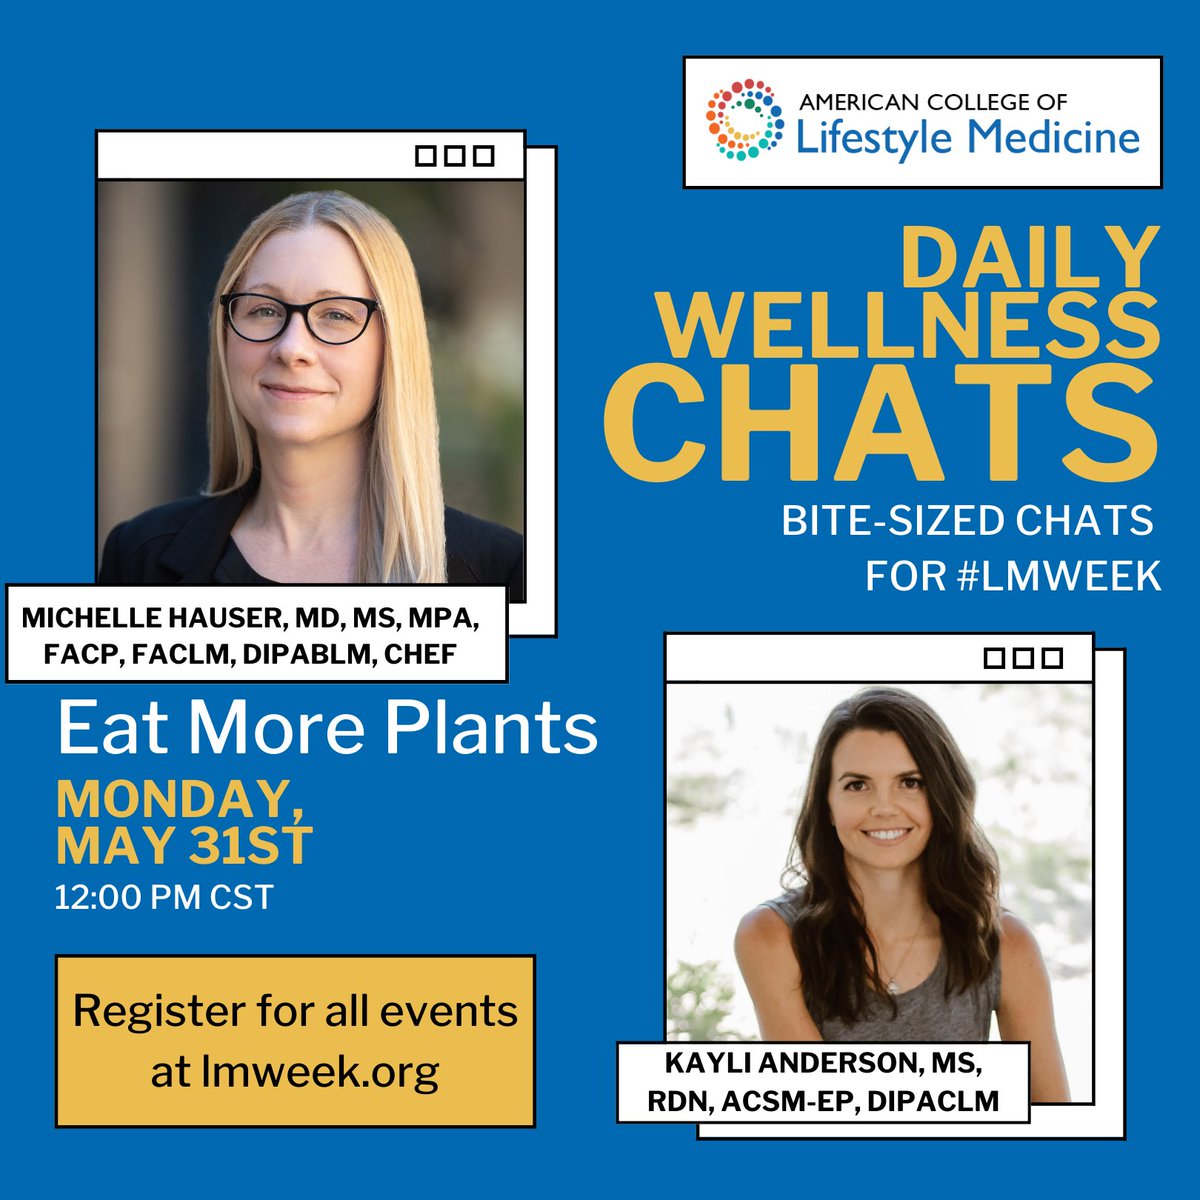 Ready to record a bite-sized chat on the WHAT, WHY, and HOW to Eat More Plants for #LMWEEK. Register at the link above for this and other chats on Lifestyle Medicine topics throughout the week (5/31-6/4) #ACLM #lifestylemedicine #eatmoreplants #foodismedicine